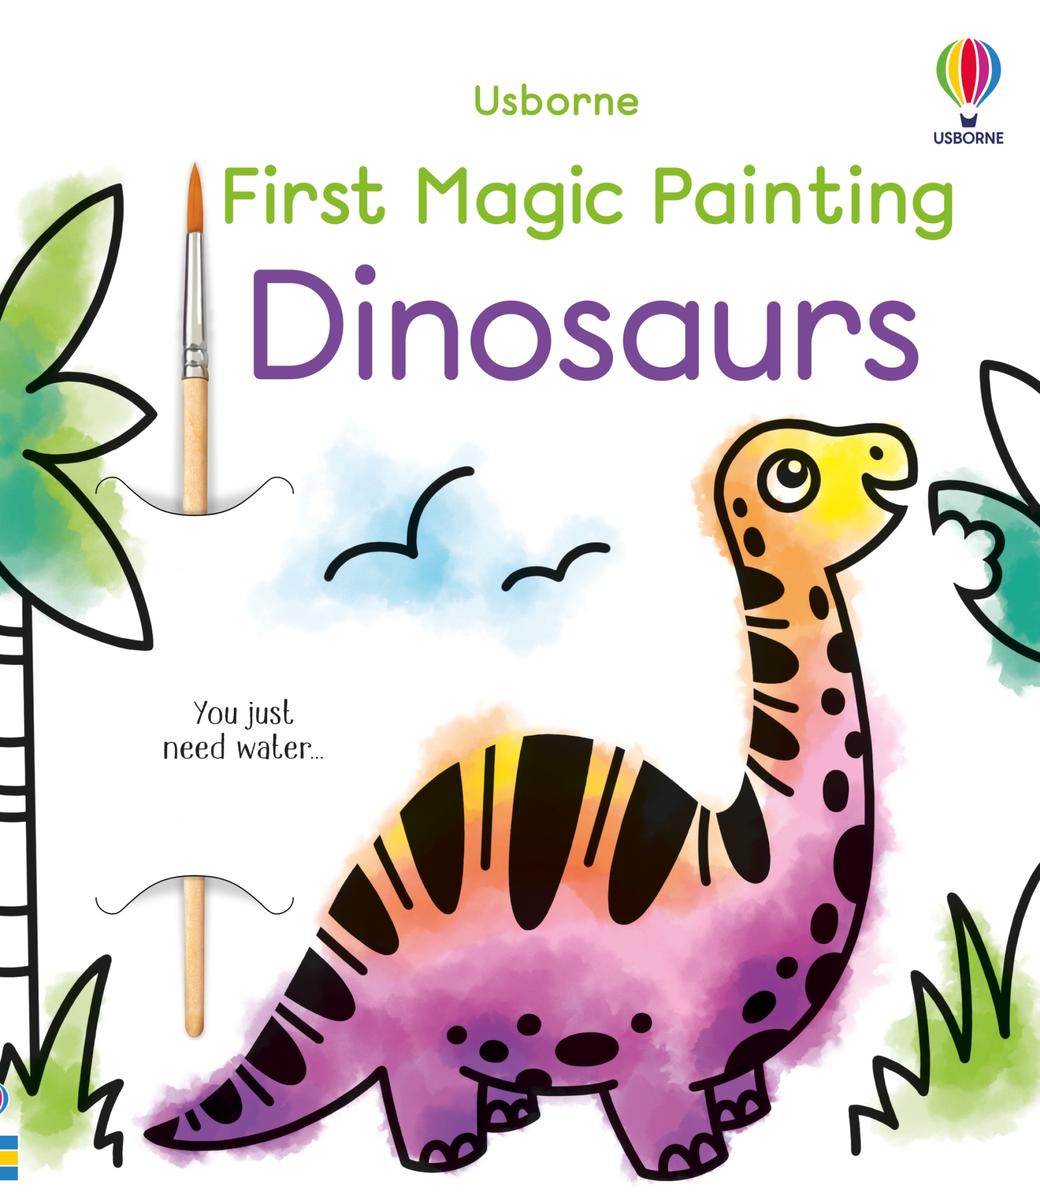 First Magic Painting Dinosaurs - 